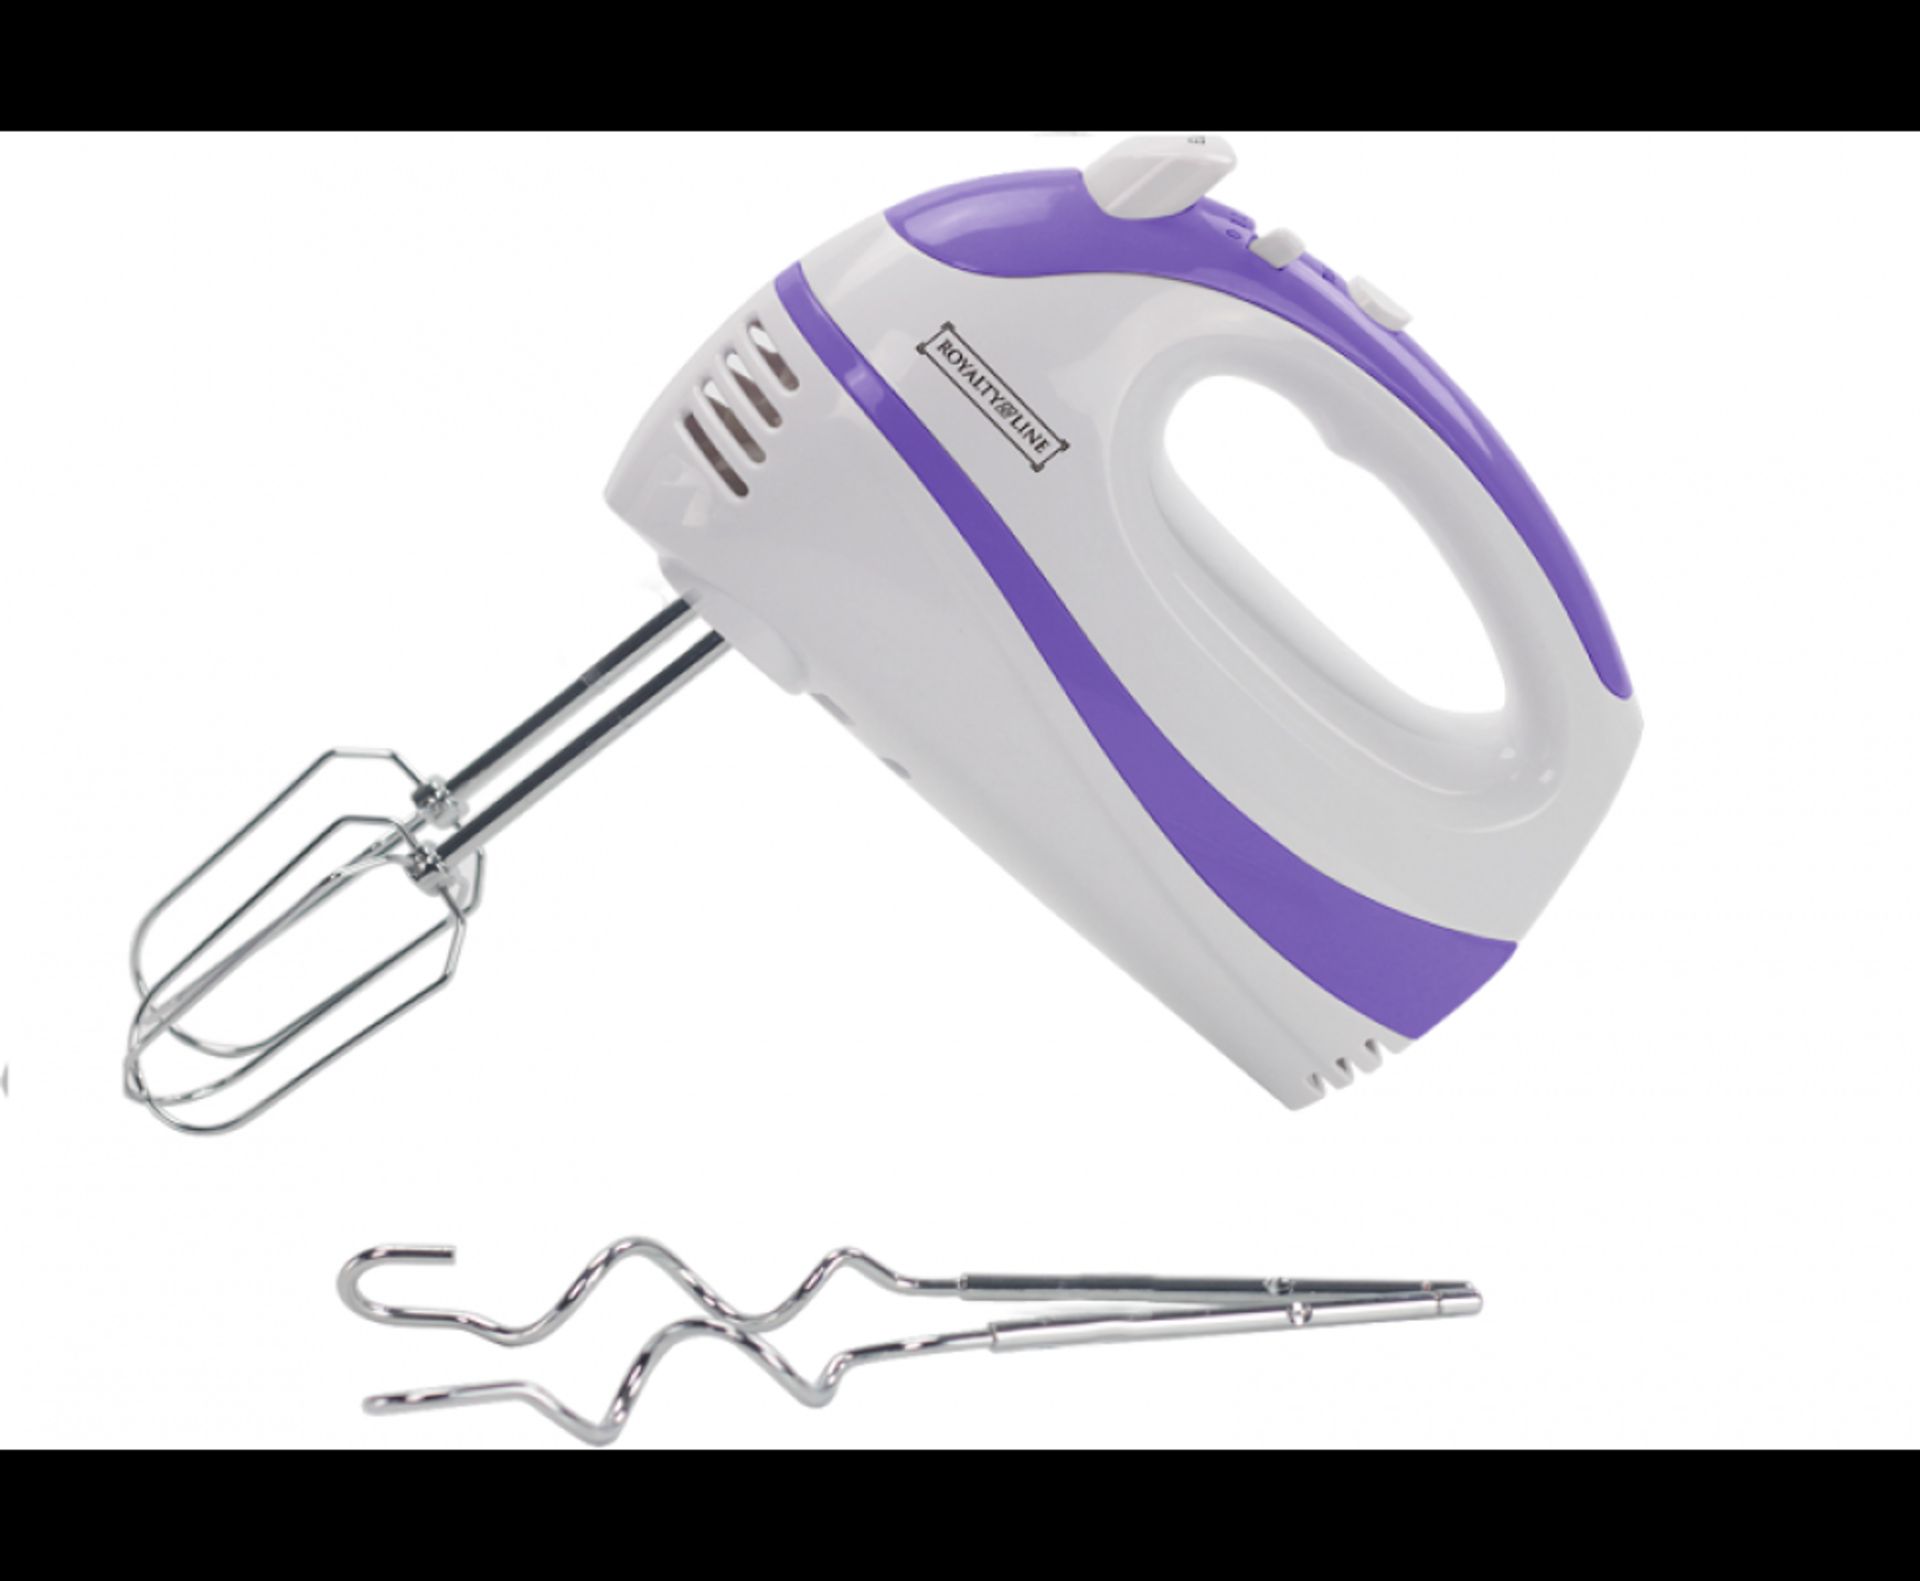 V *TRADE QTY* Brand New Royalty Line 200w Hand Mixer X 3 YOUR BID PRICE TO BE MULTIPLIED BY THREE